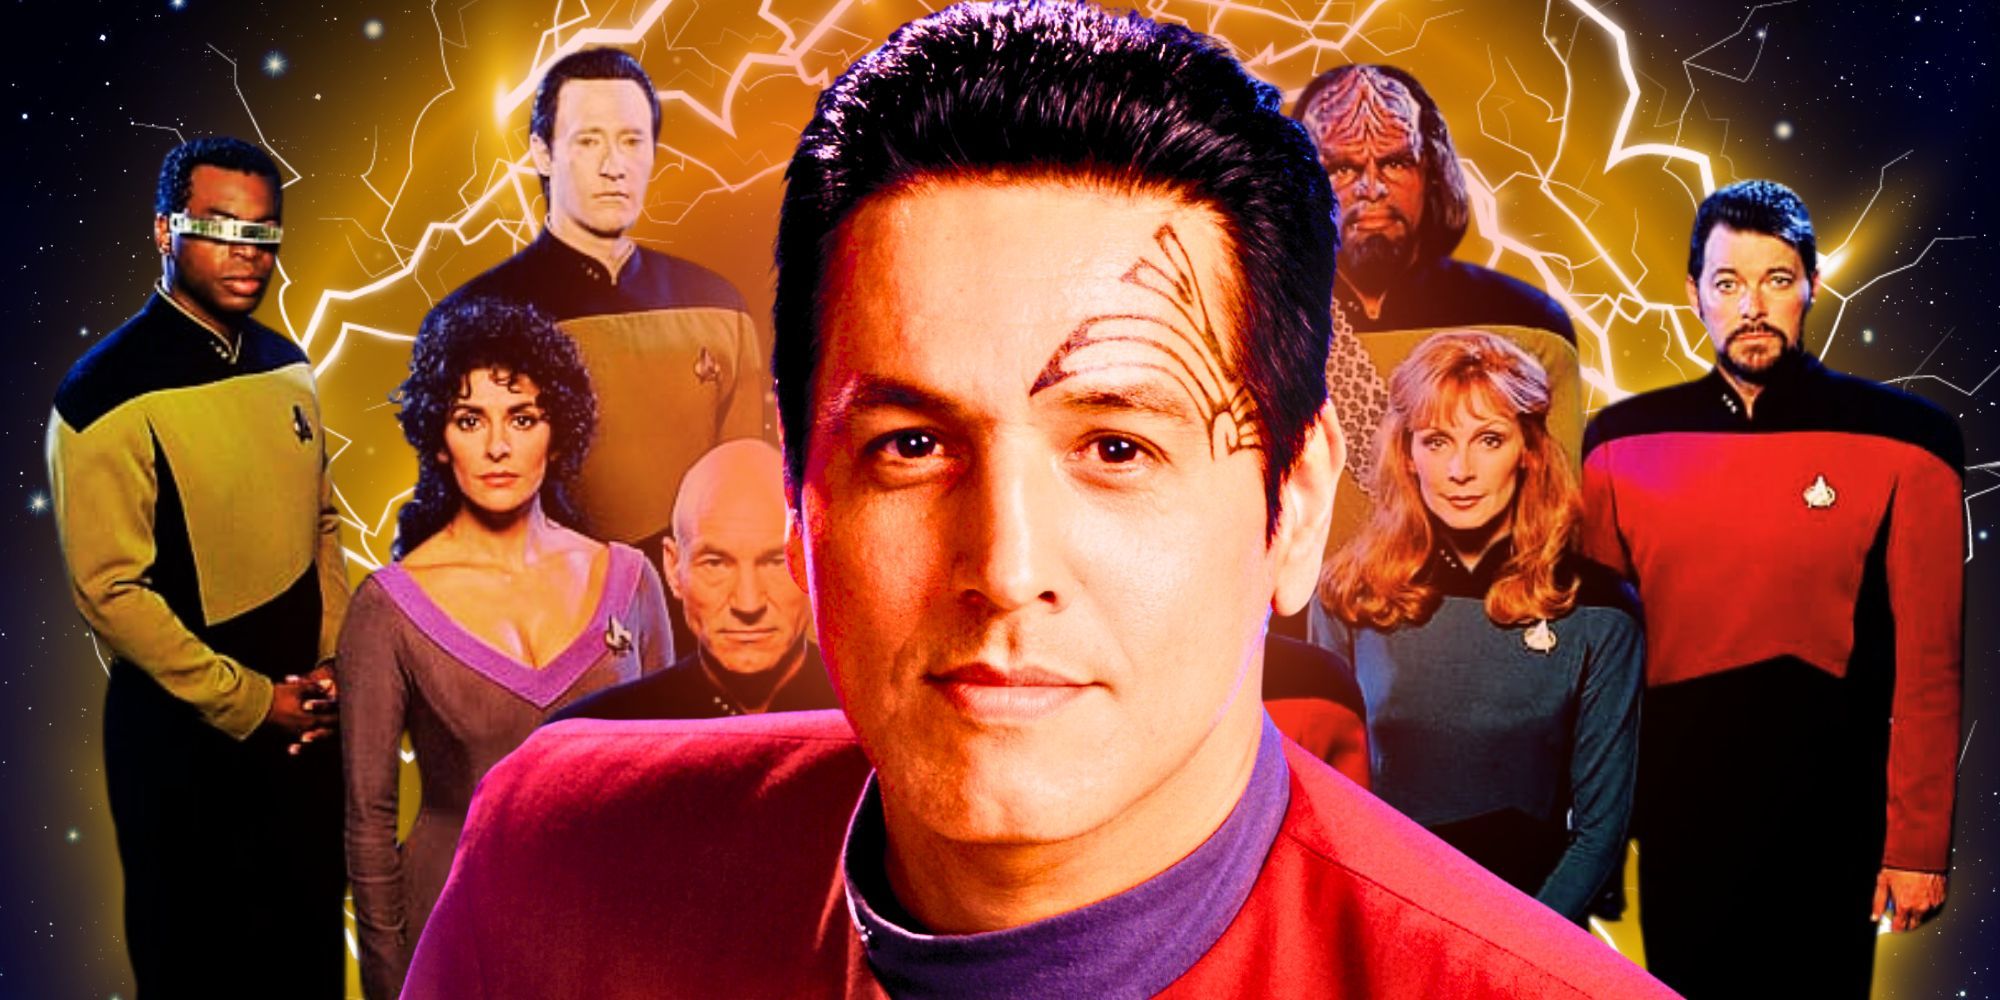 Chakotay (Robert Beltran) from Star Trek: Voyager stands in front of the Star Trek: TNG cast with lightning in the background.